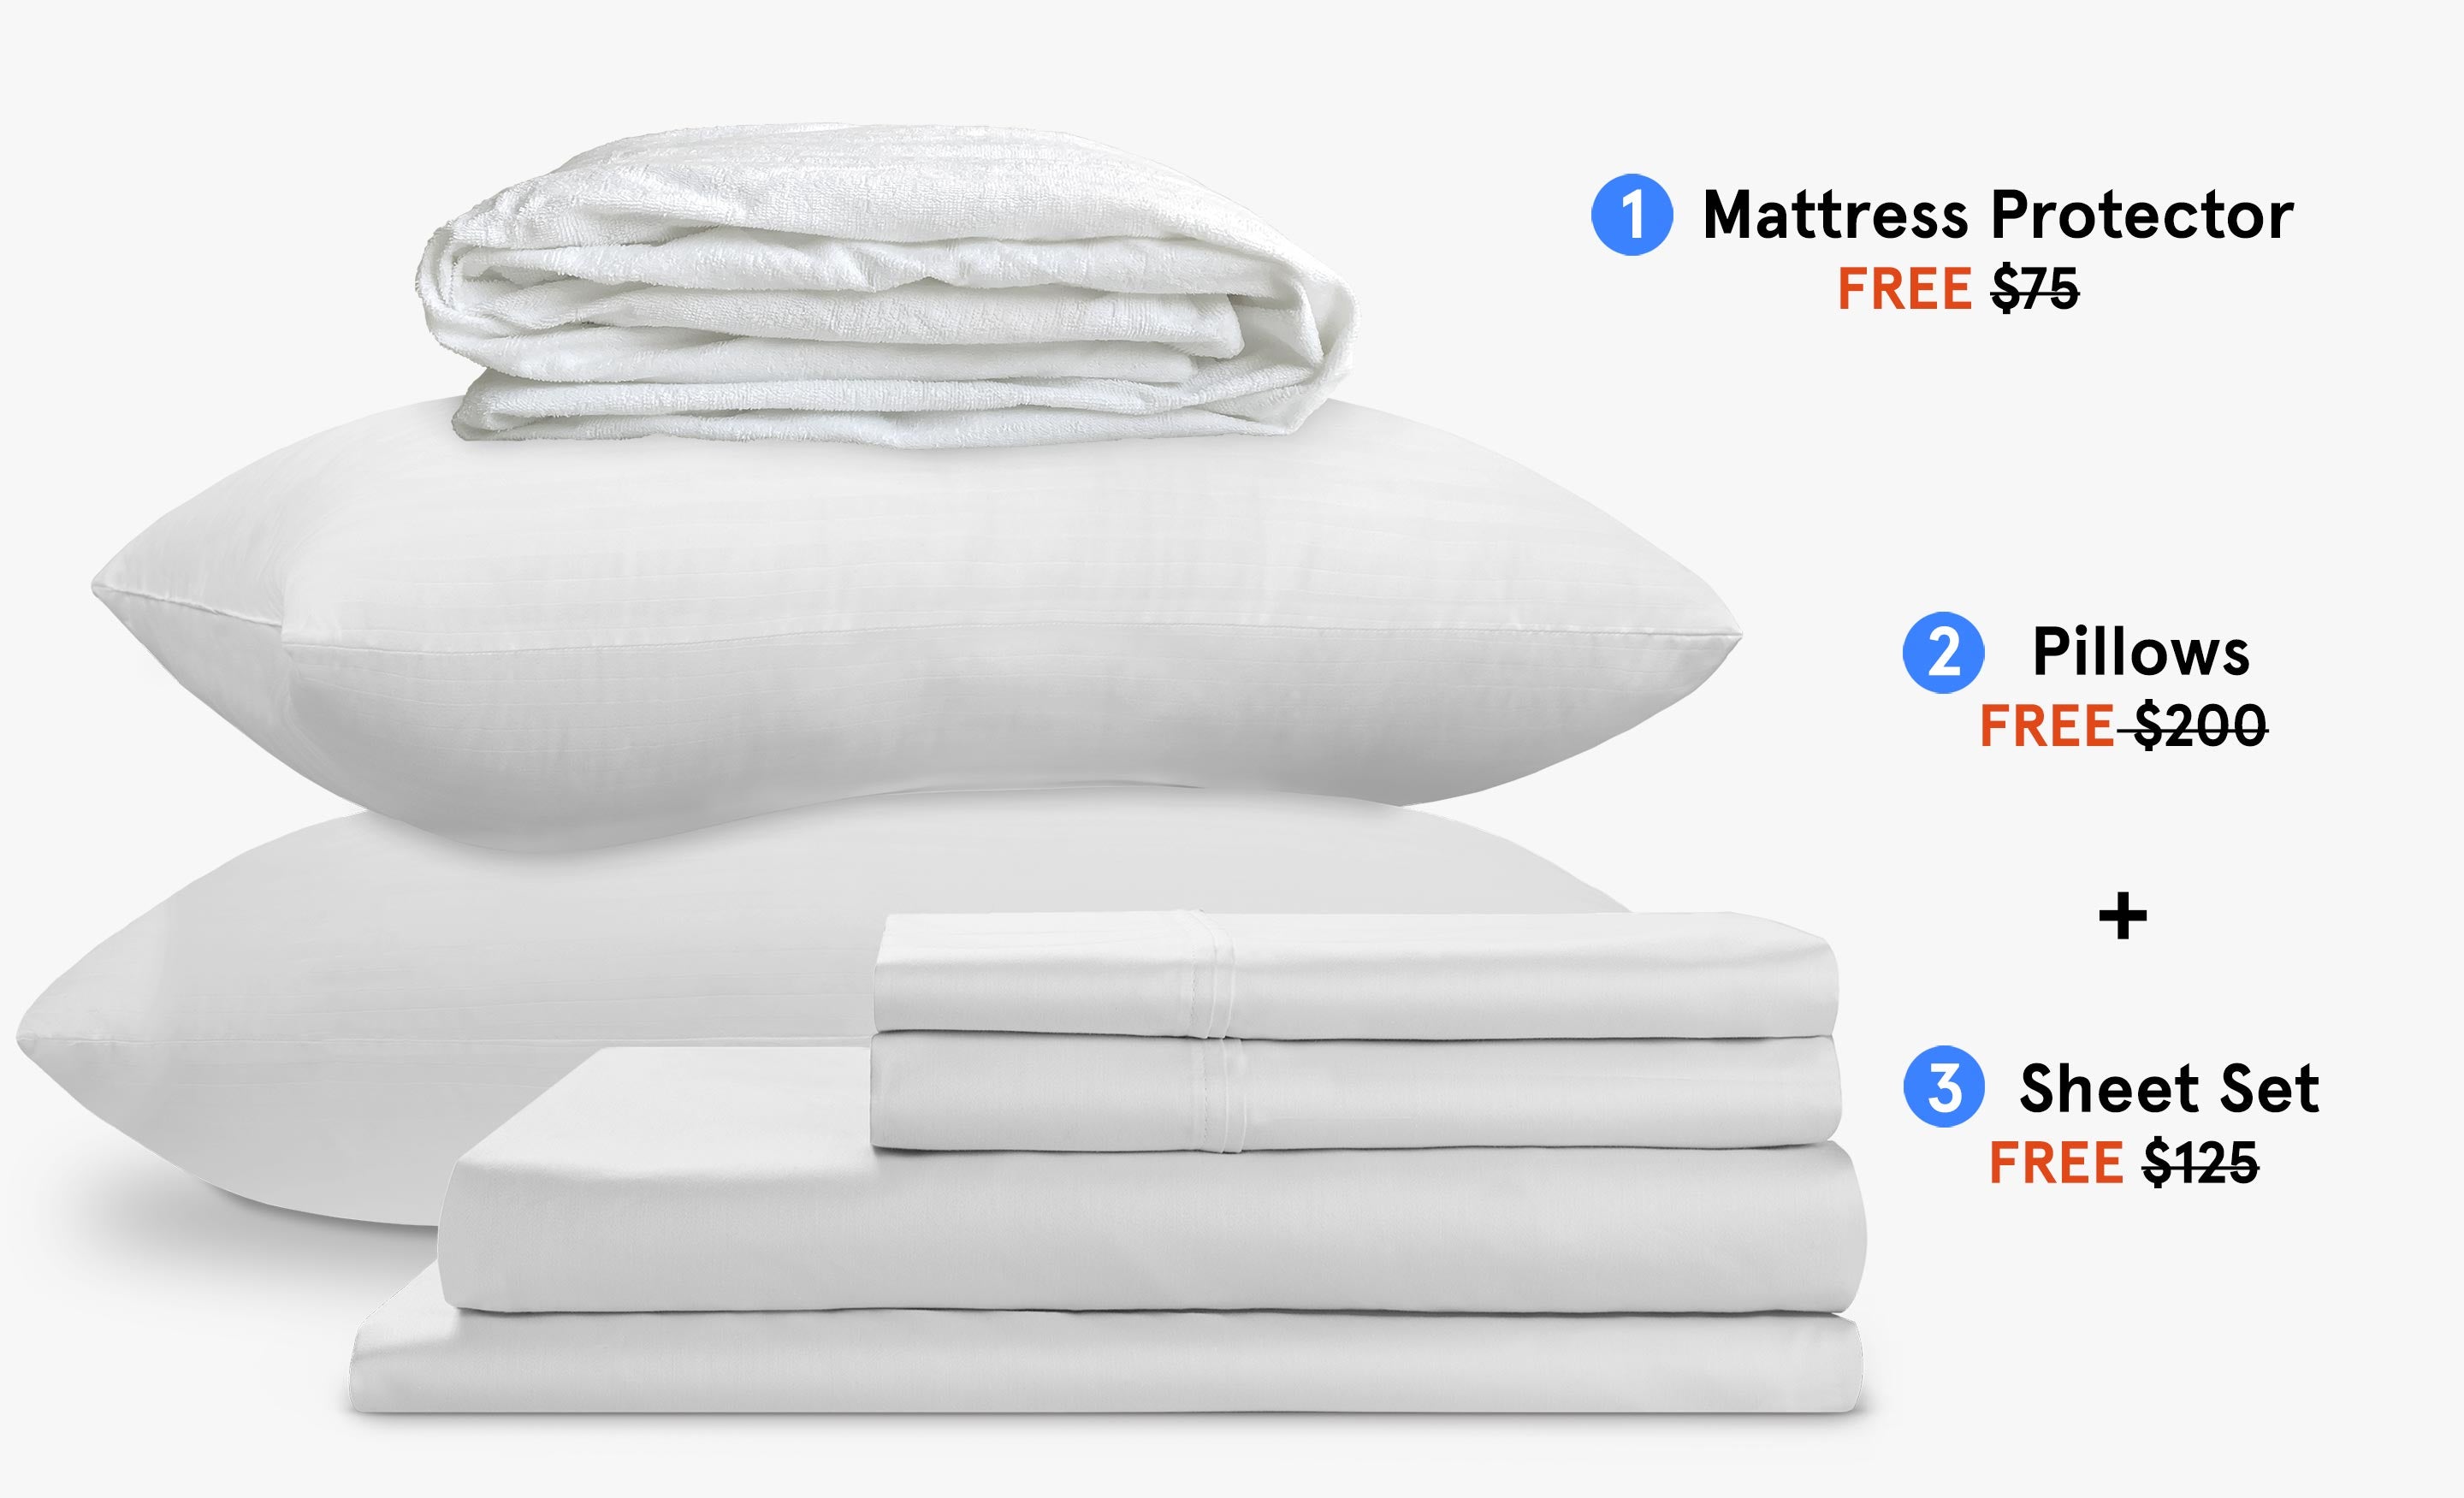 Your Guide to Buying Mattress Accessories